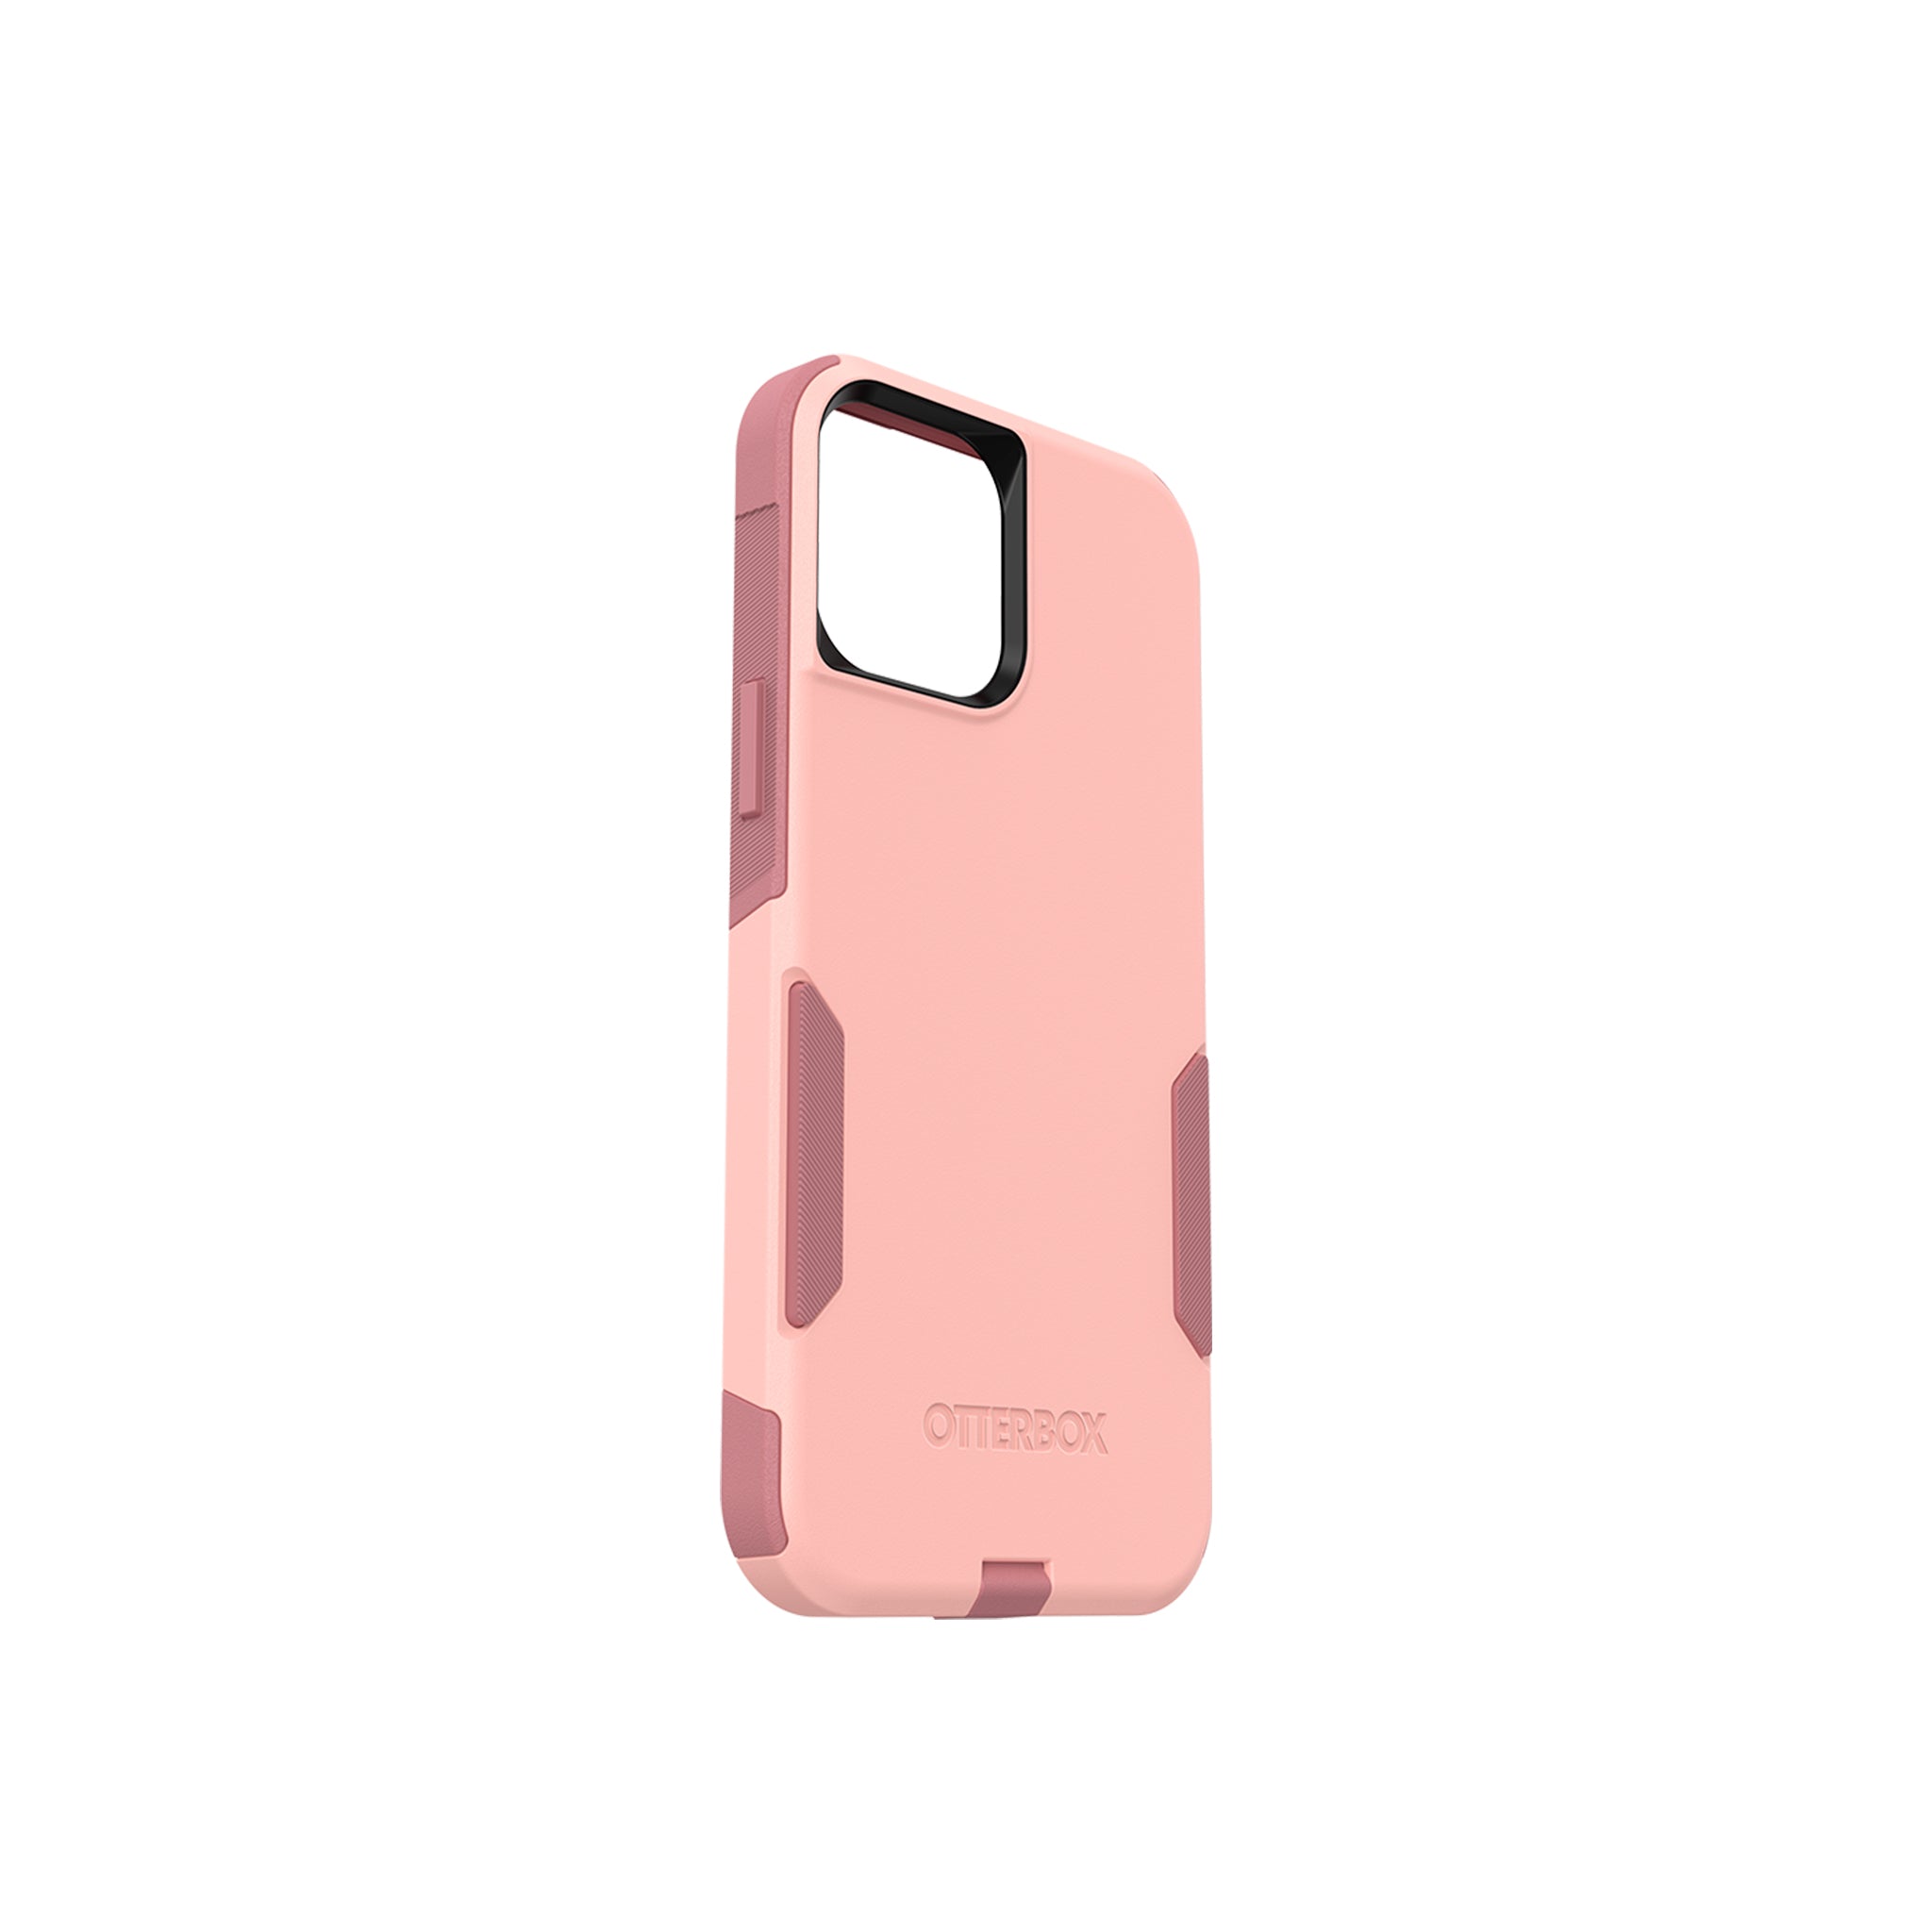 OtterBox - Commuter for iPhone 12 Pro Max - Ballet Way